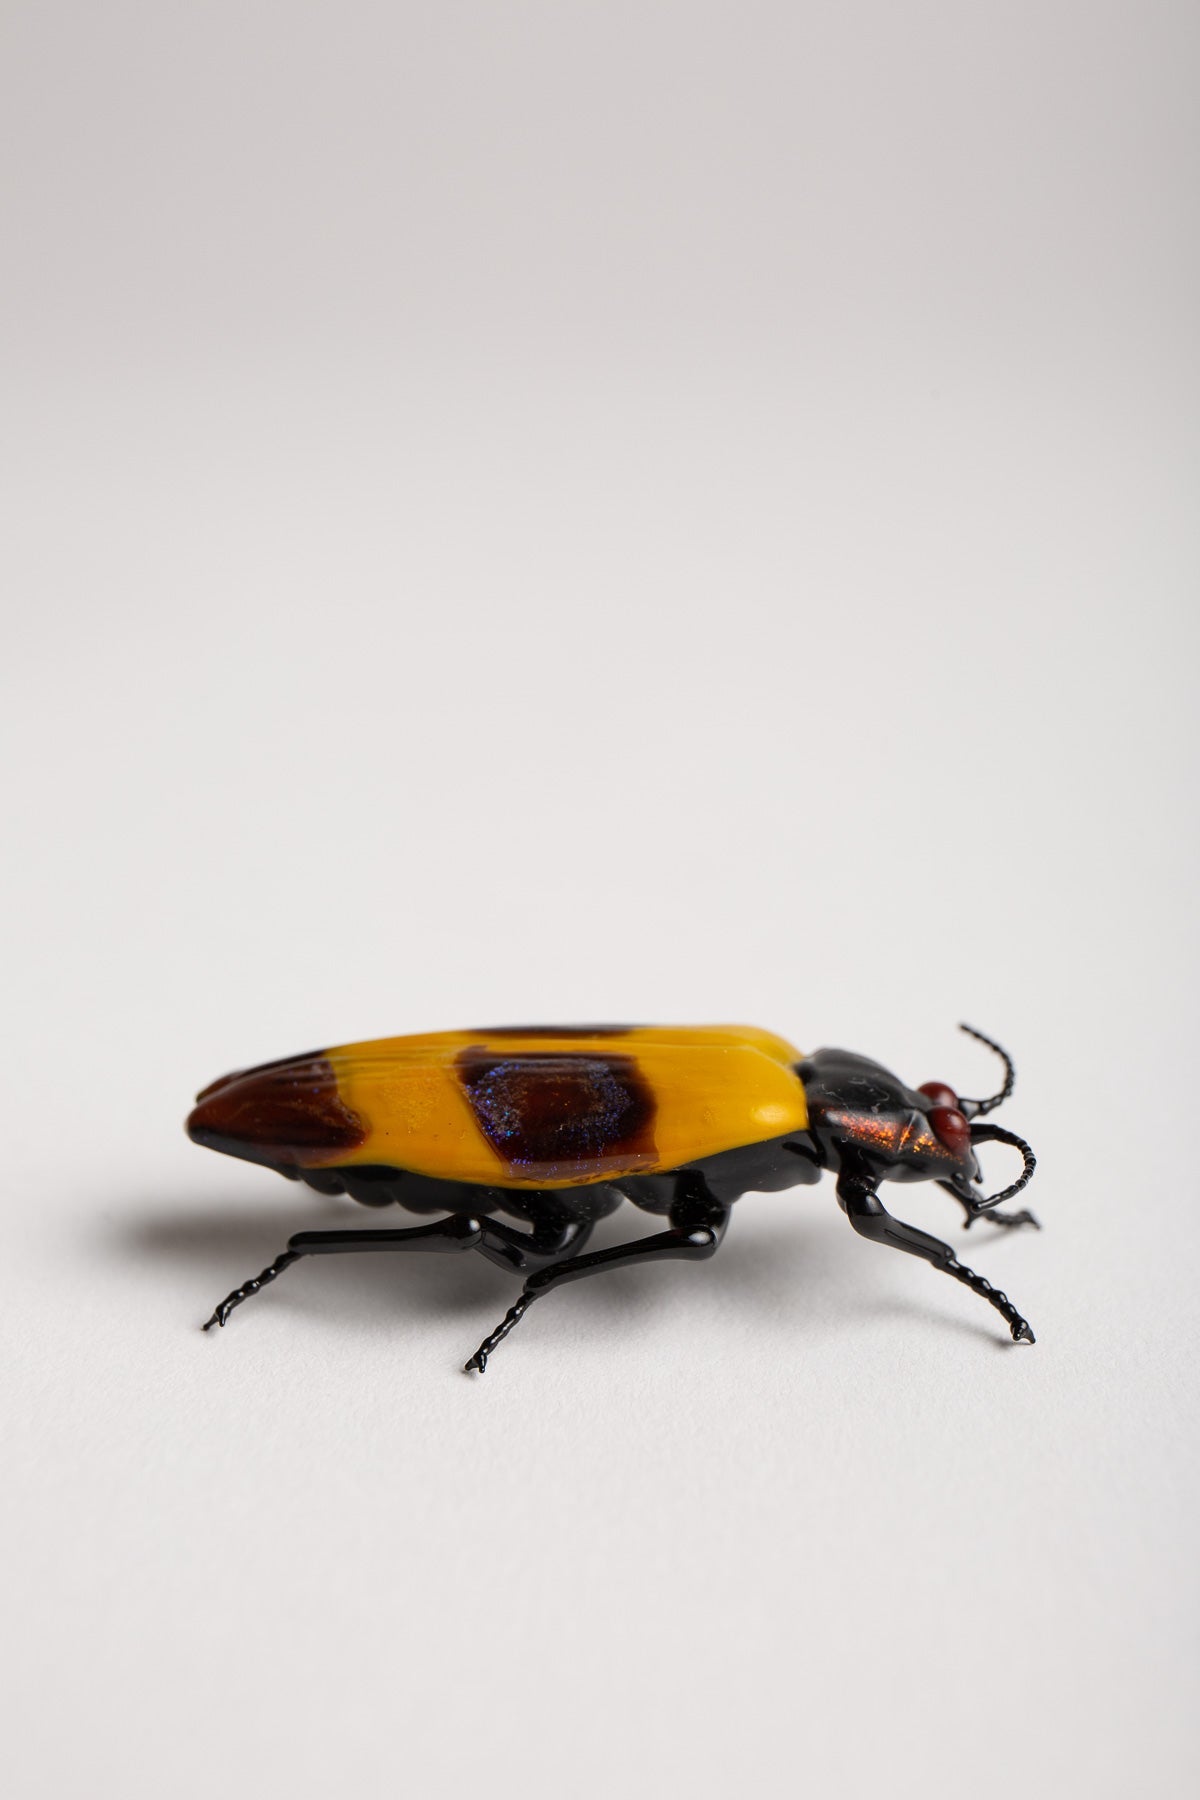 MAXFIELD PRIVATE COLLECTION | STRIPED BEETLE